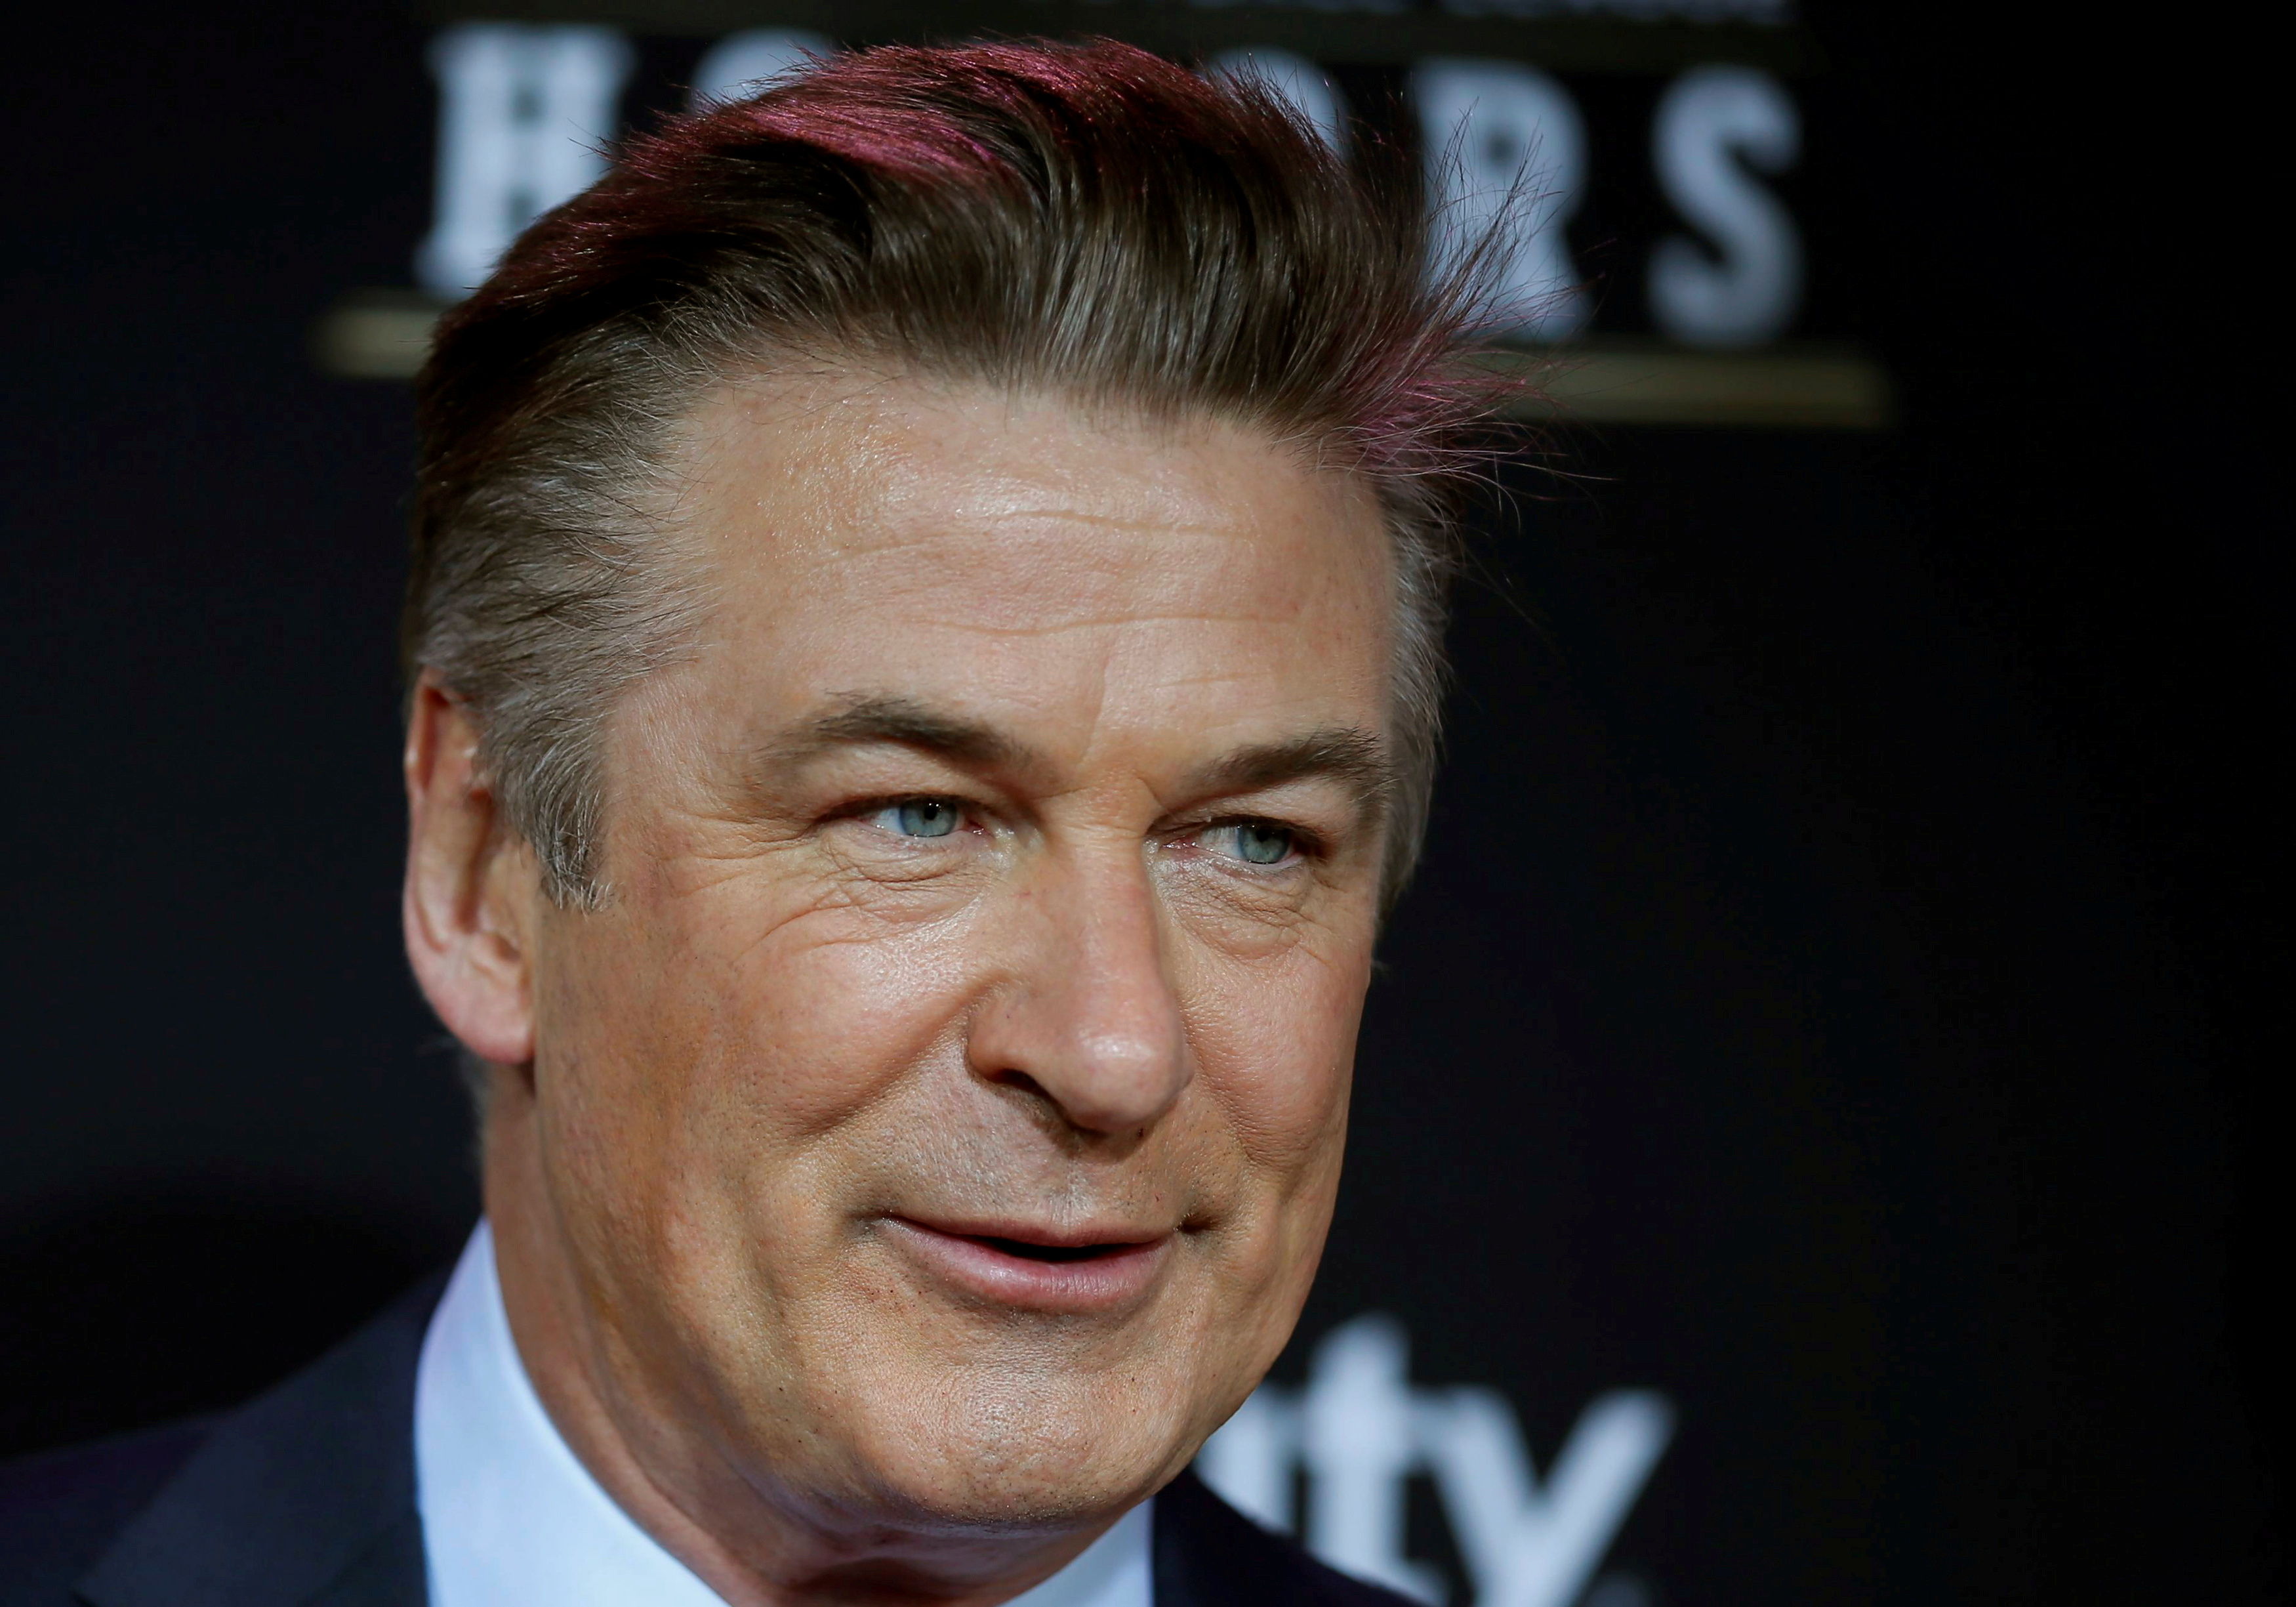 Host Alec Baldwin arrives at the 2nd Annual NFL Honors in New Orleans, Louisiana, February 2, 2013. REUTERS/Lucy Nicholson